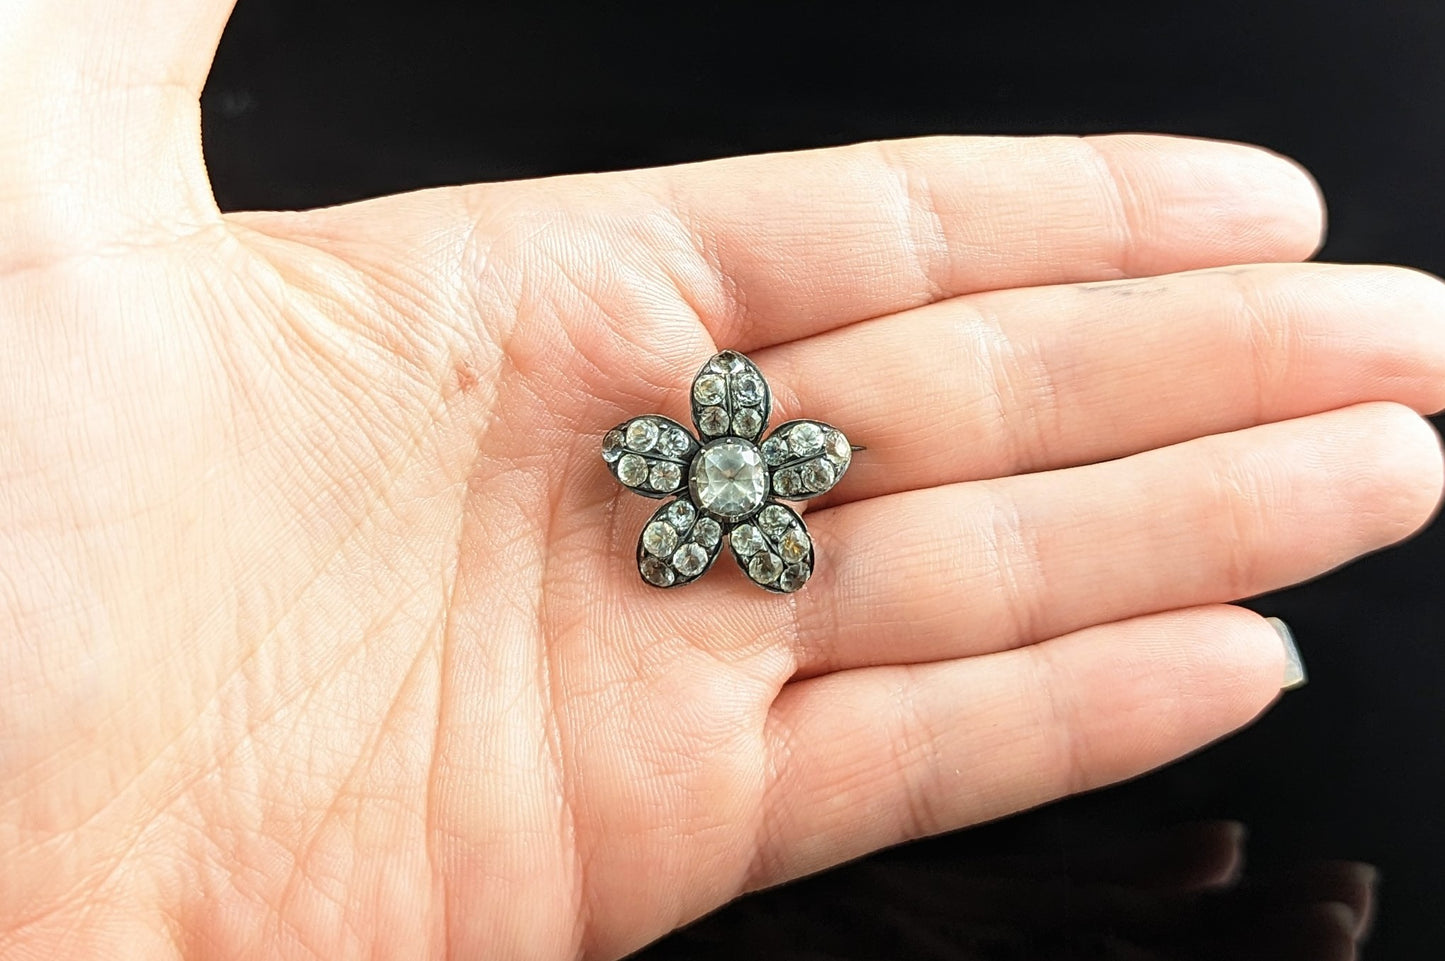 Antique Georgian paste lace pin, Flower, Sterling silver brooch